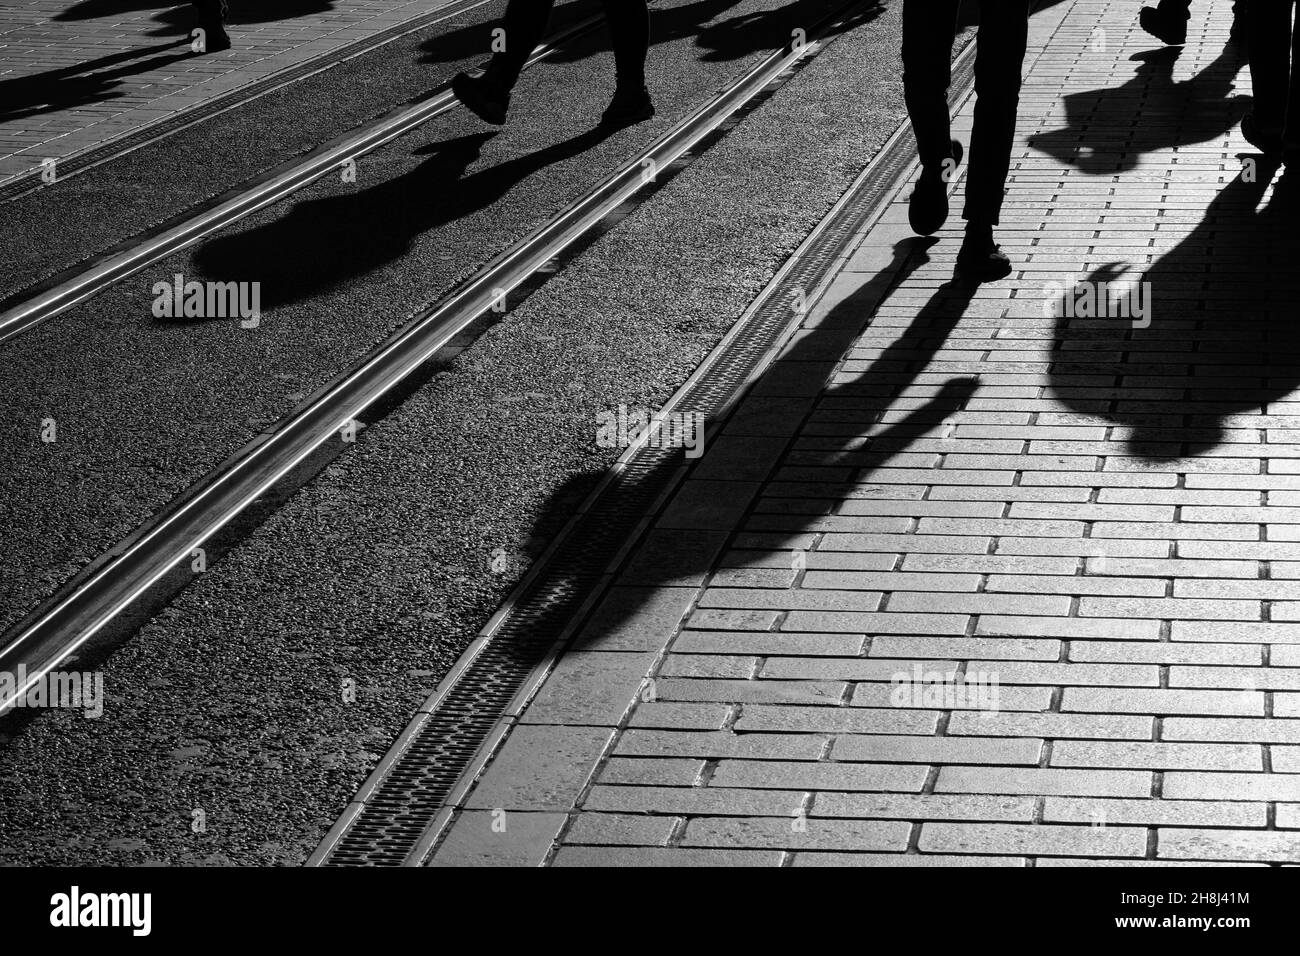 Shadows of people at Beyoglu, Istanbul, Turkey. There are tram rails on the ground. Stock Photo